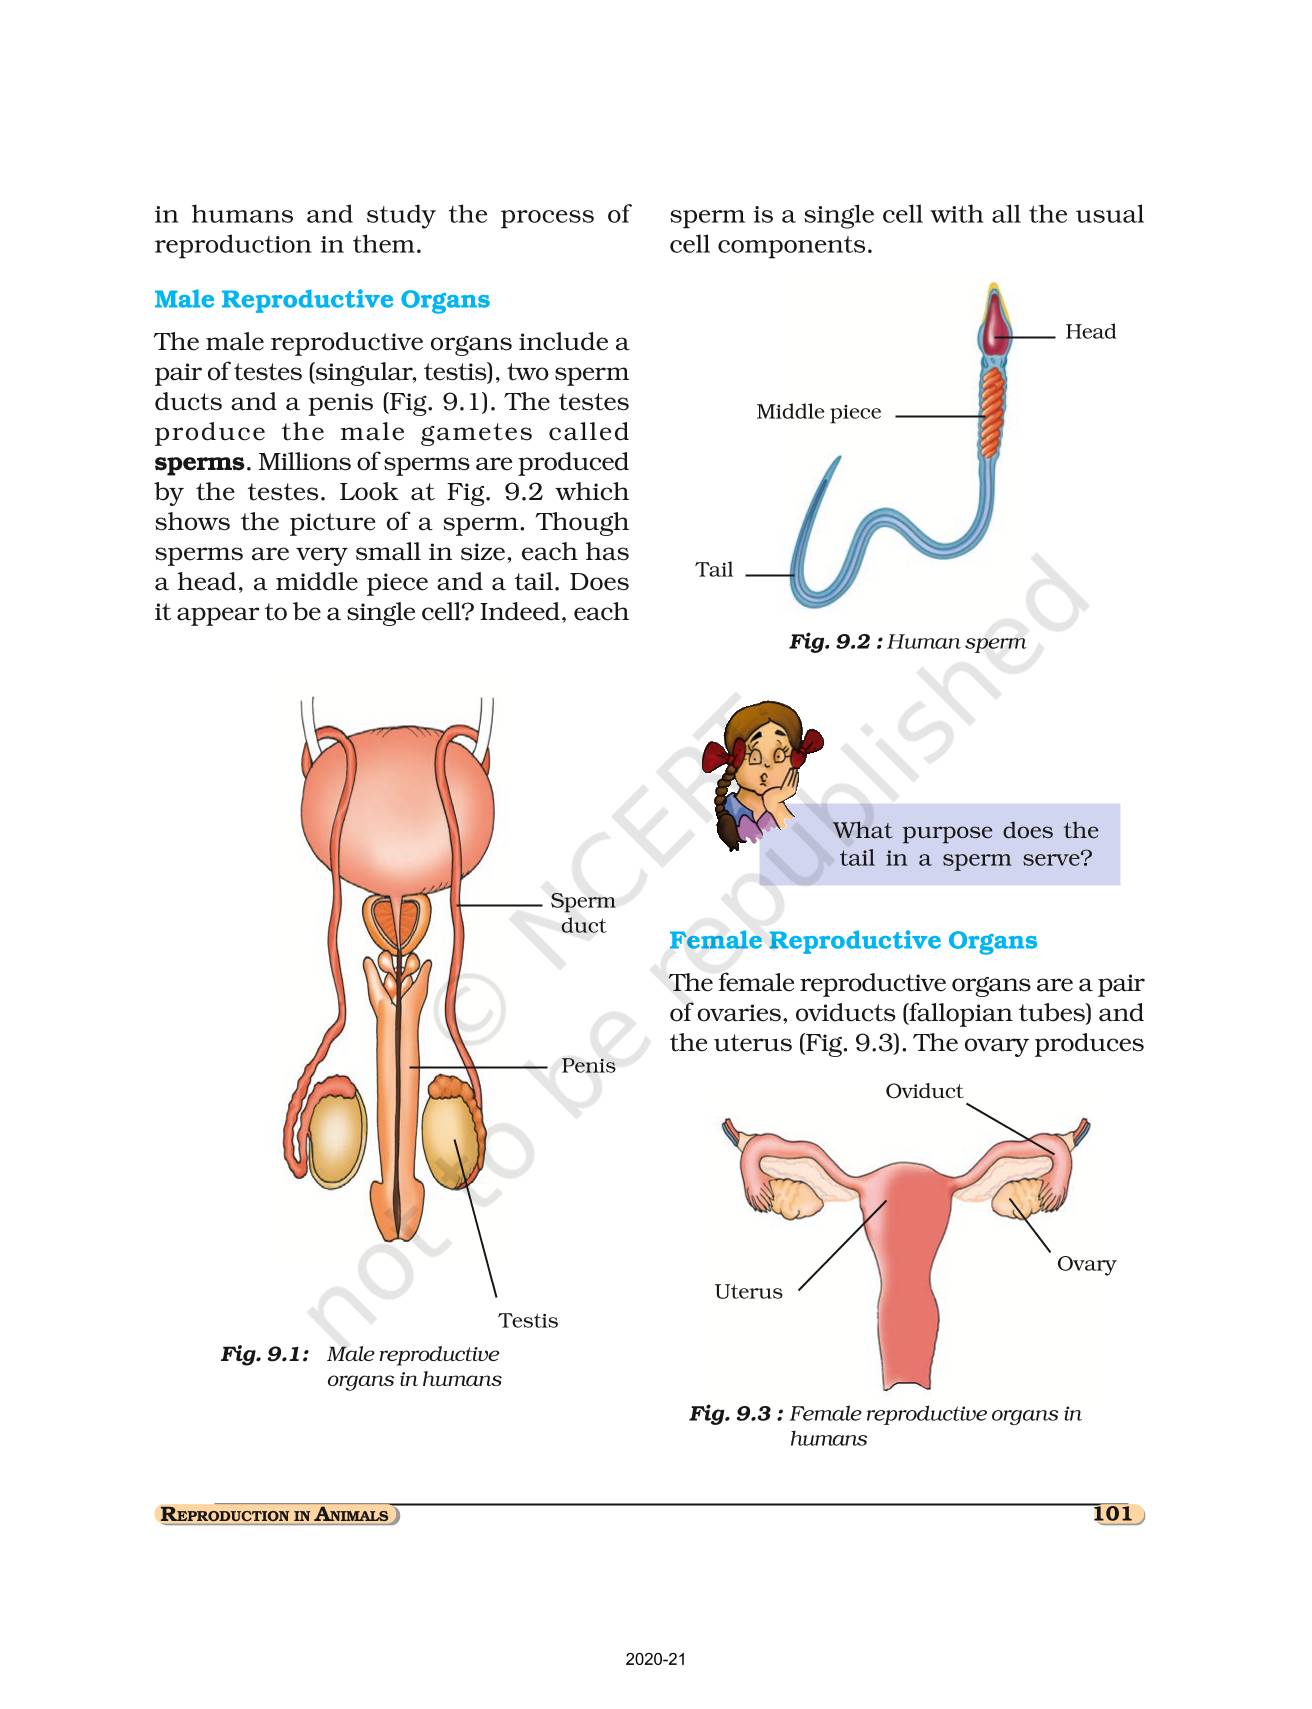 Reproduction In Animals - NCERT Book of Class 8 Science